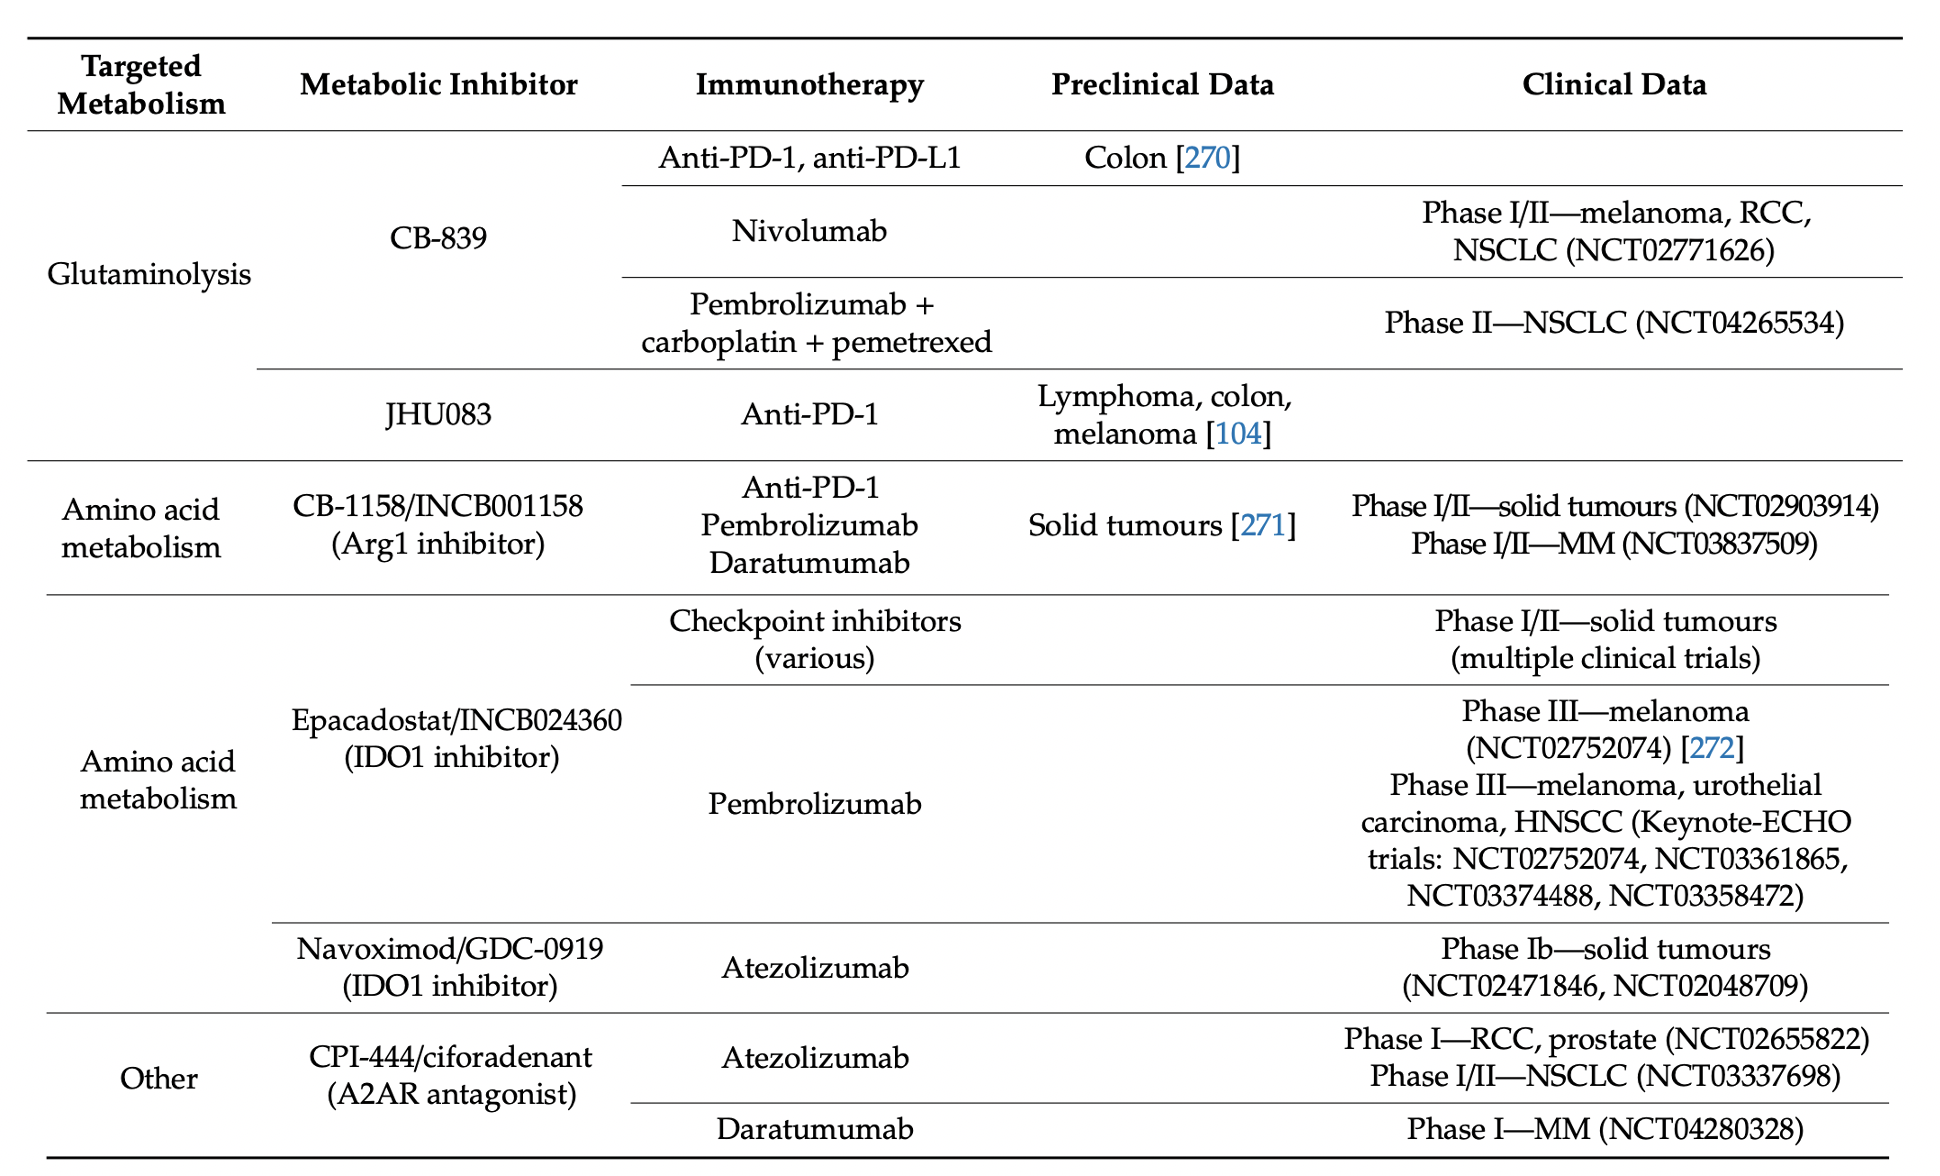  Table 1. Metabolic inhibitors in combination with immunotherapy.